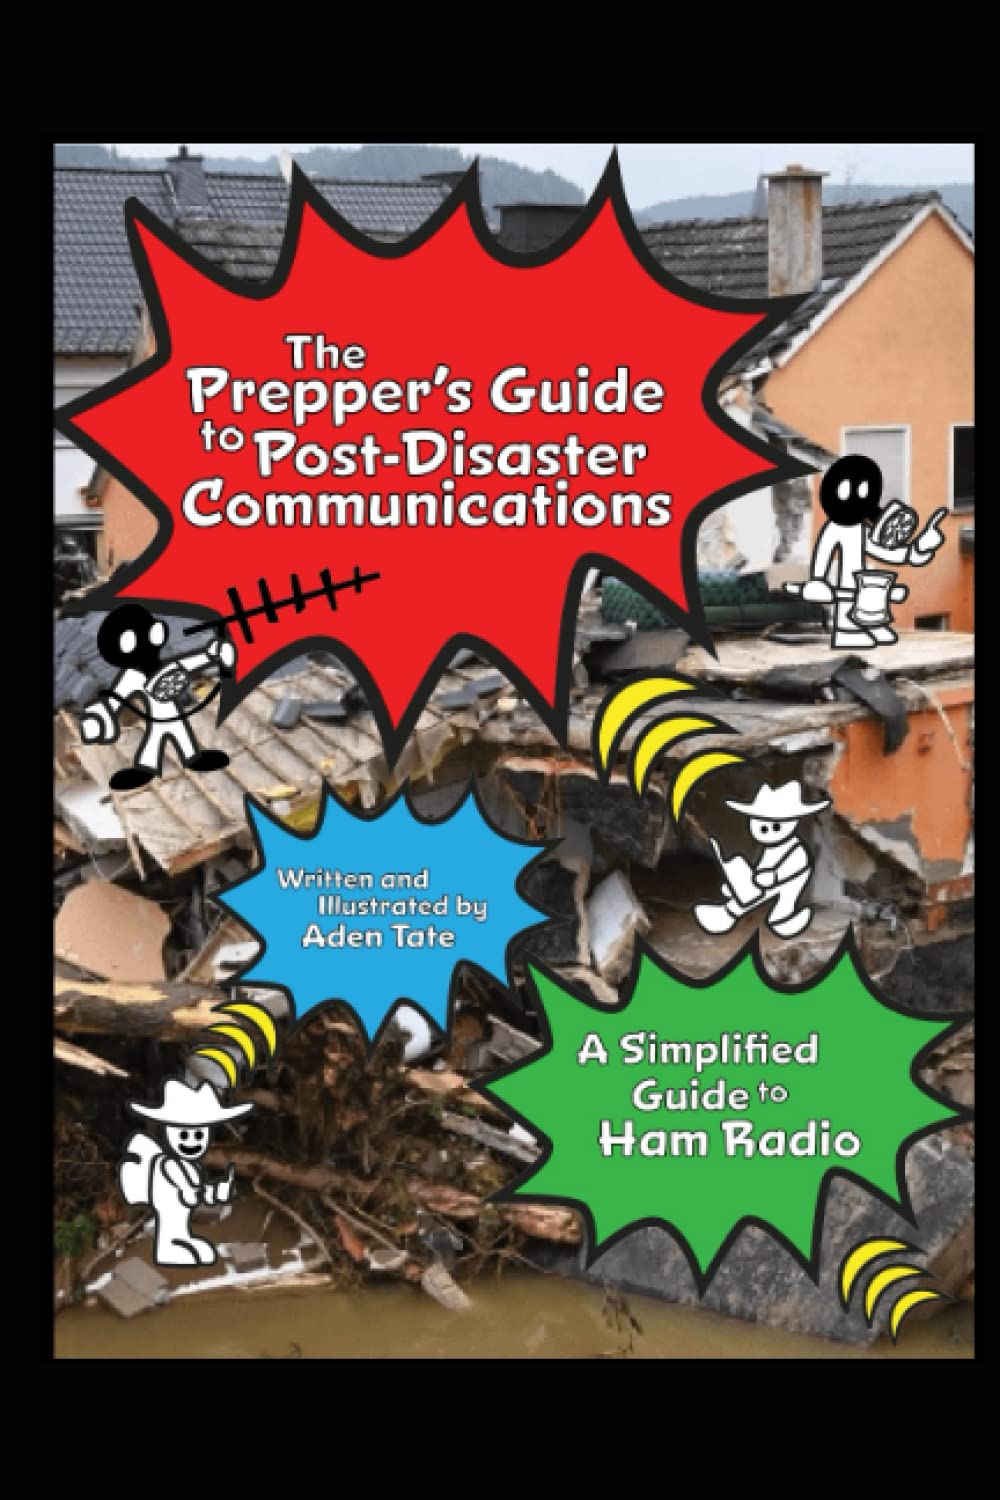 The Prepper’s Guide to Post-Disaster Communications: A Simplified Guide to Ham Radio